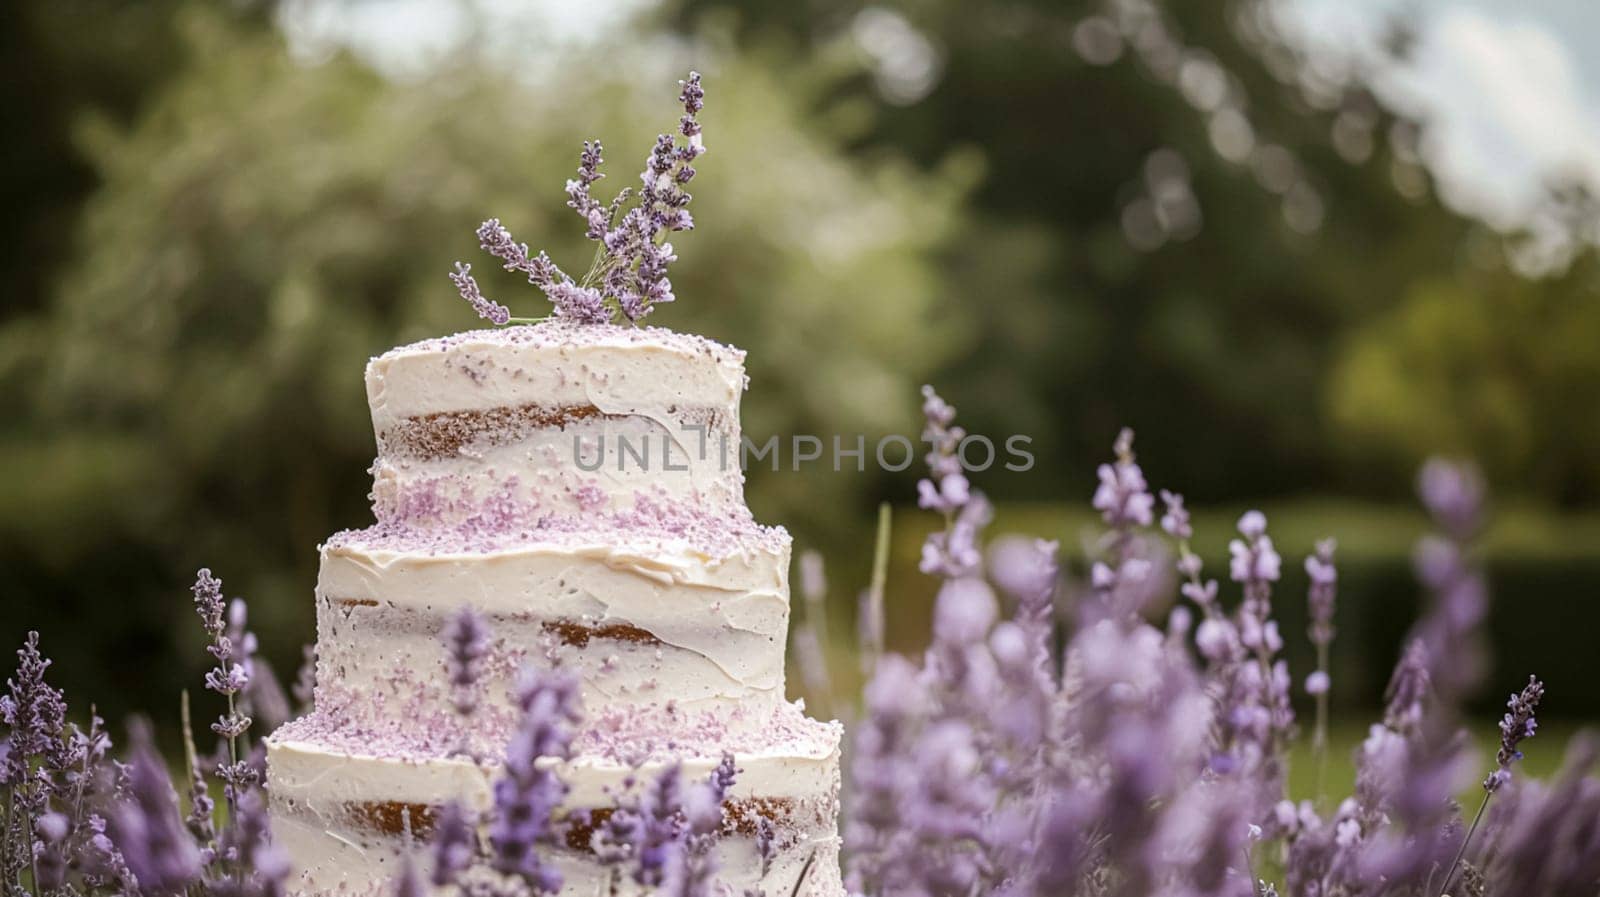 Wedding cake with lavender flowers. Festive table decoration.